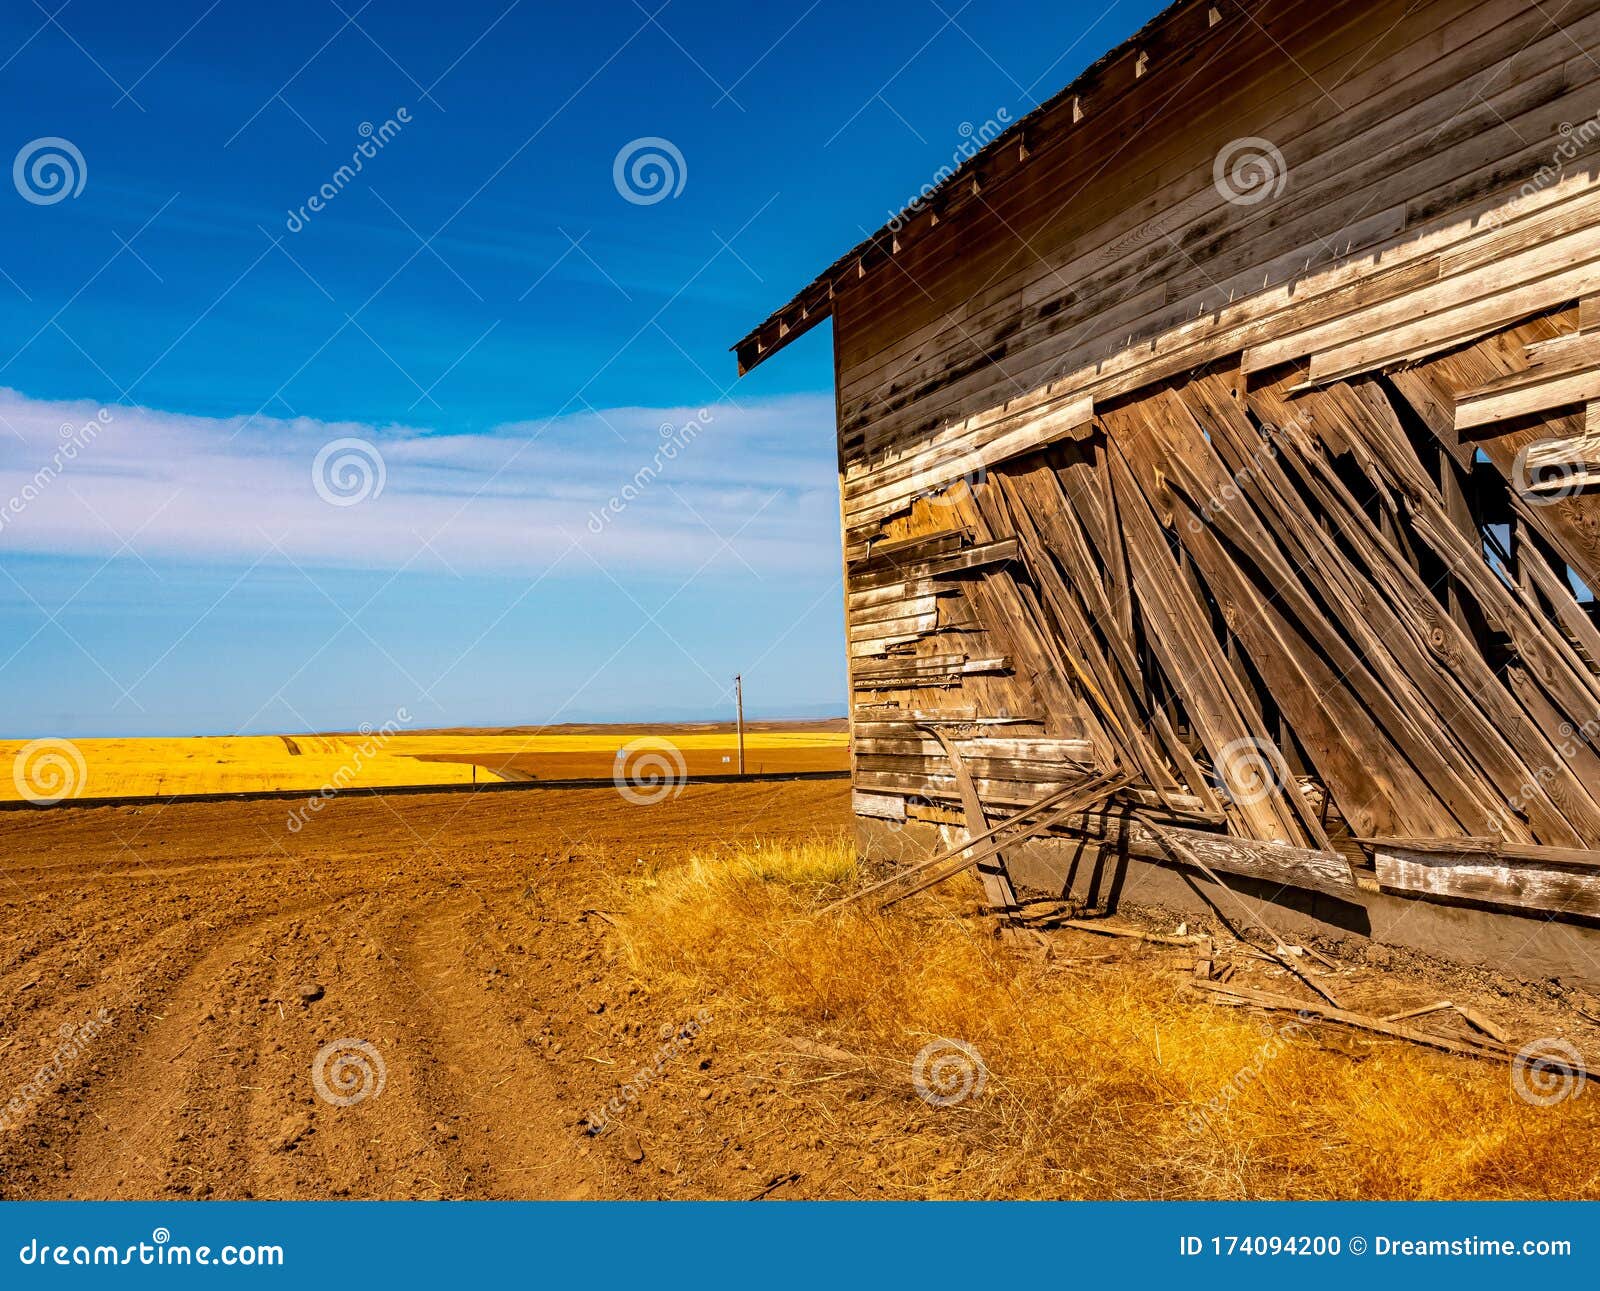 Battered Barn And Gold Stock Photo Image Of Road